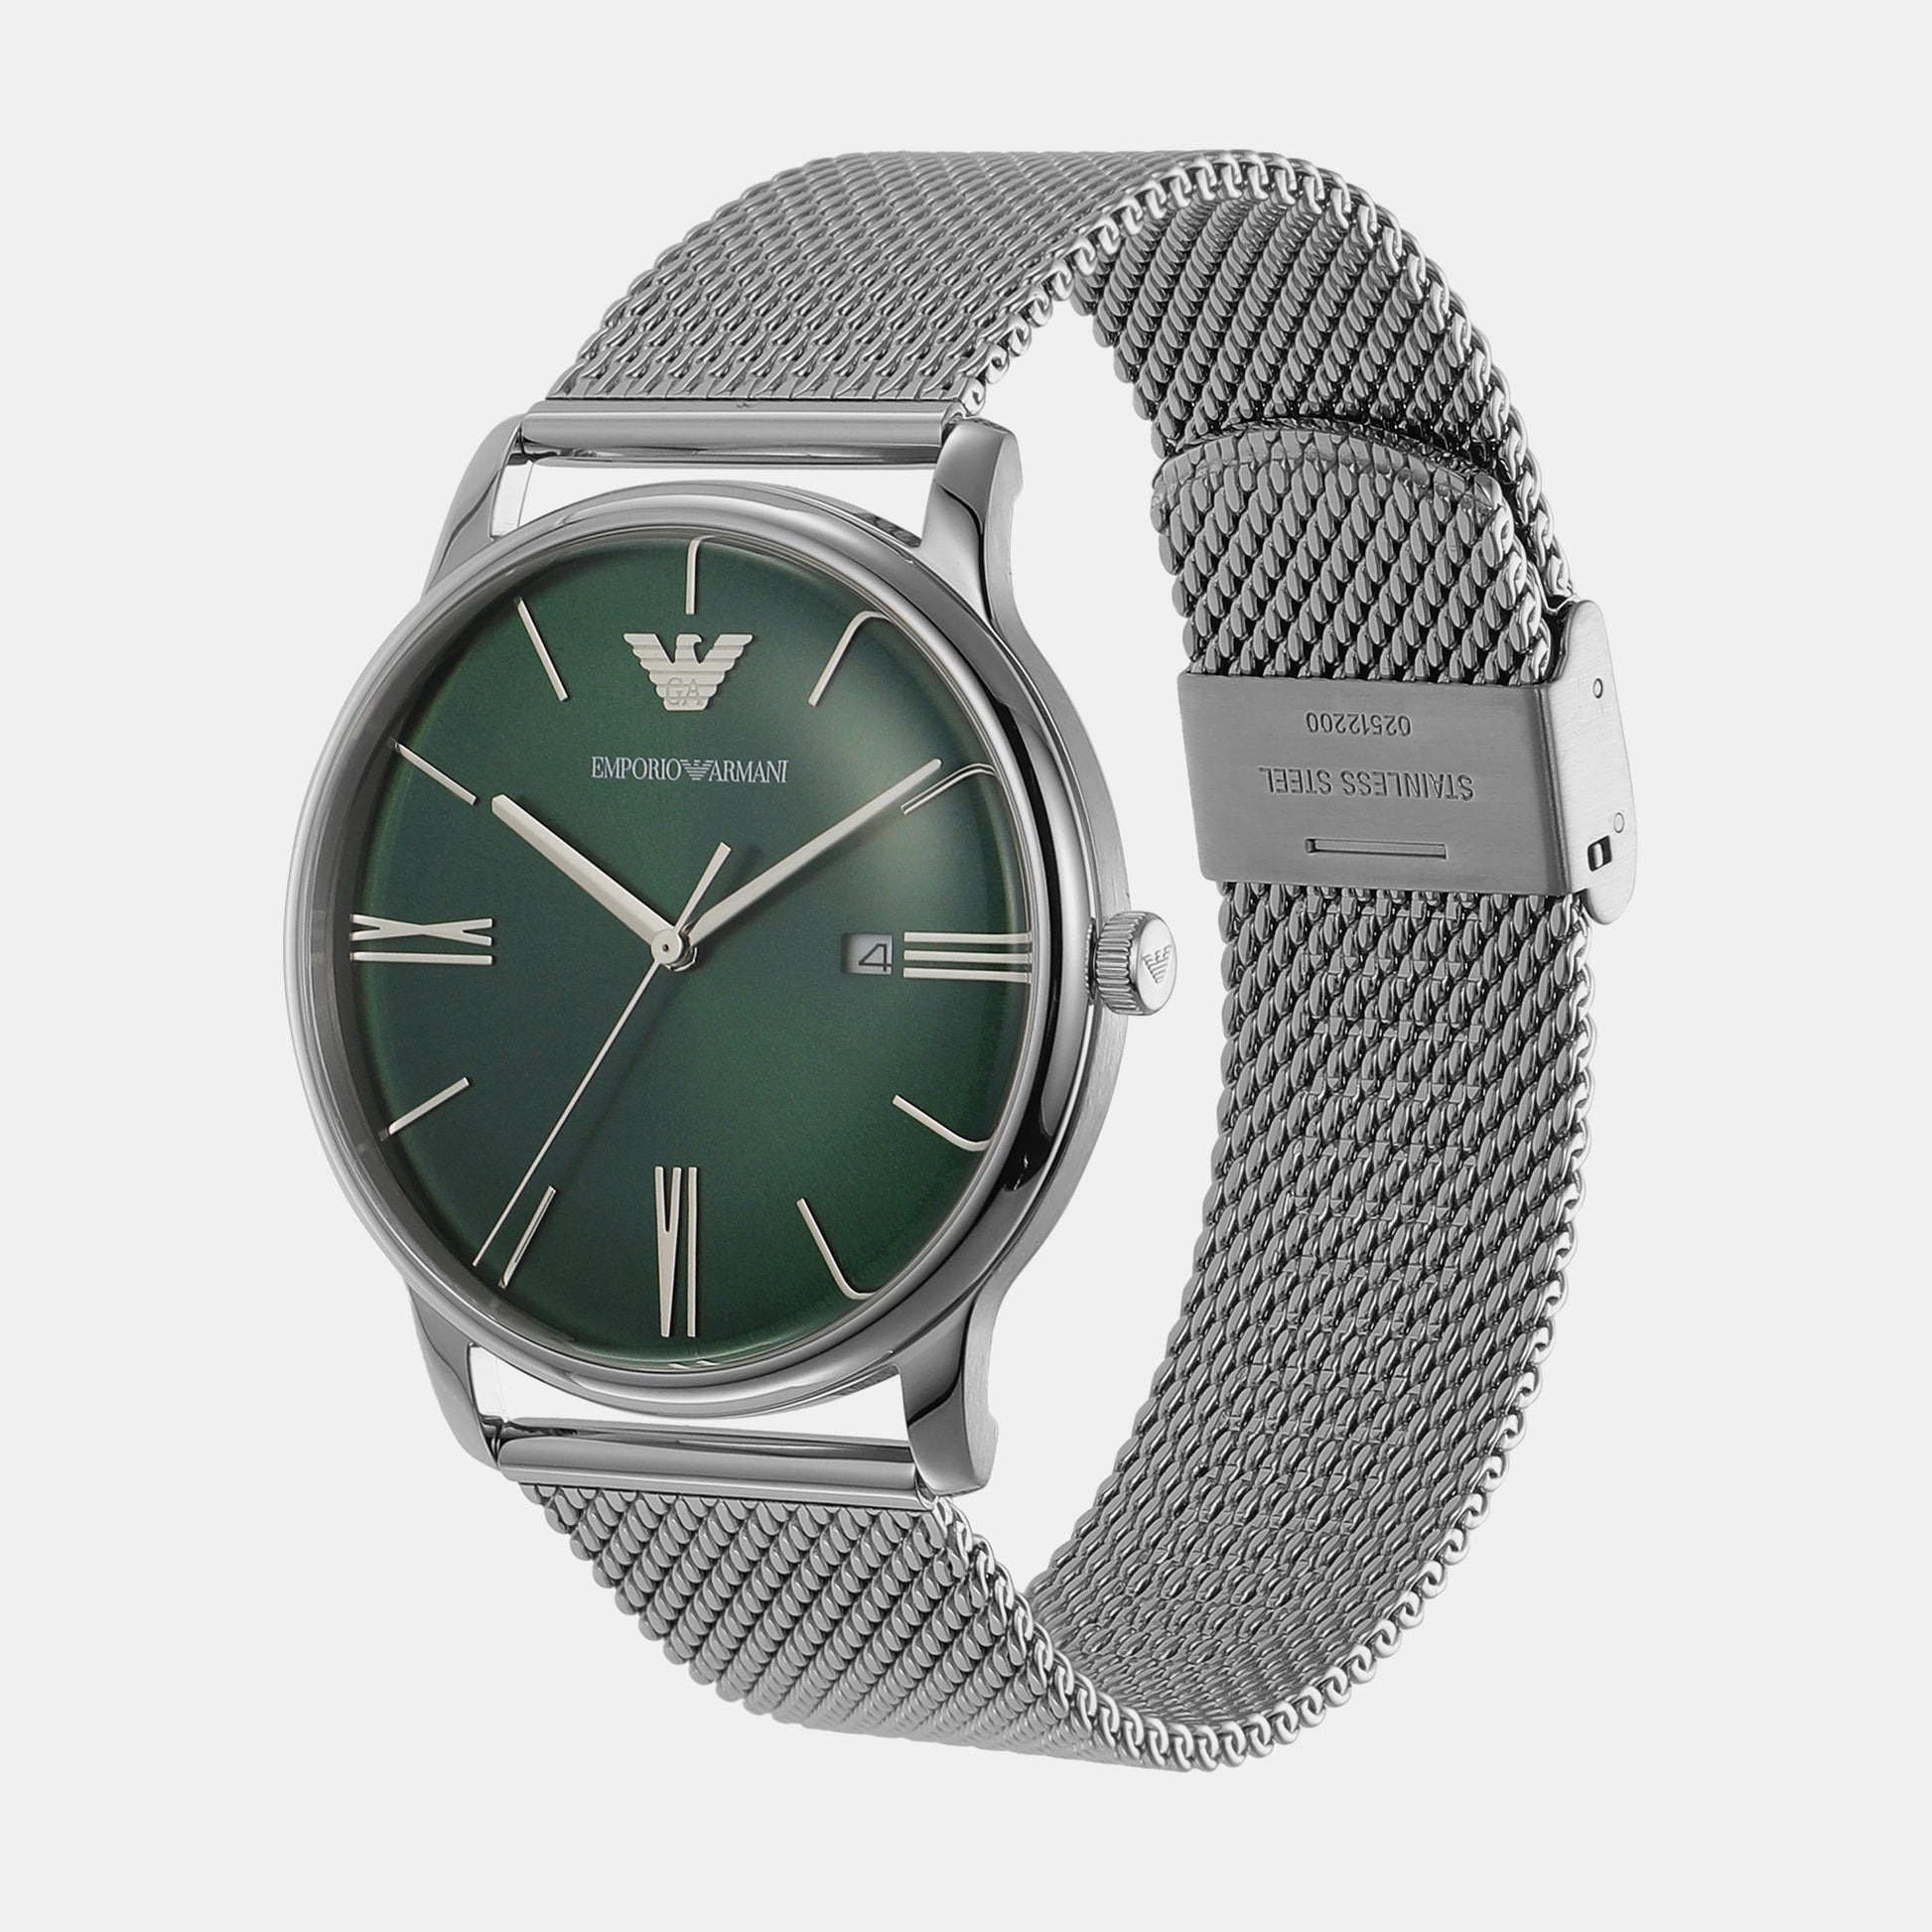 In Green Watch Steel Male – Time Just Stainless AR11578 Analog